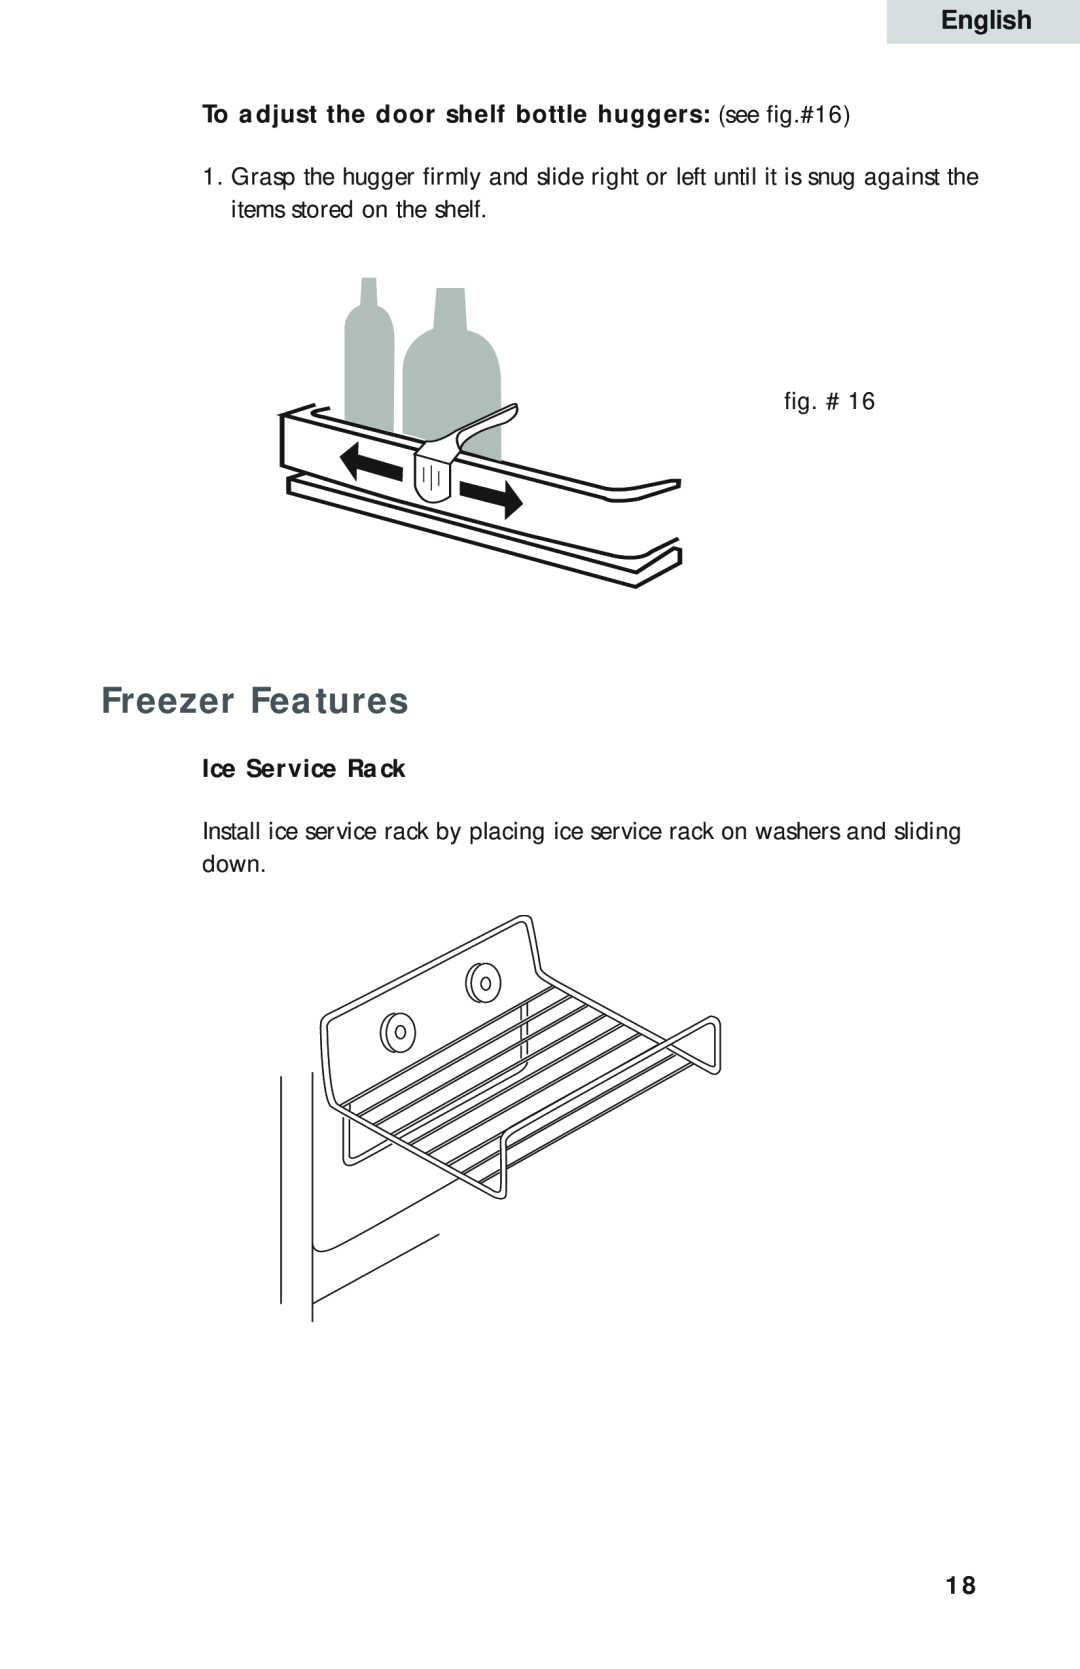 Haier HBP18, HBQ18, HBE18 user manual Freezer Features, To adjust the door shelf bottle huggers see fig.#16, Ice Service Rack 